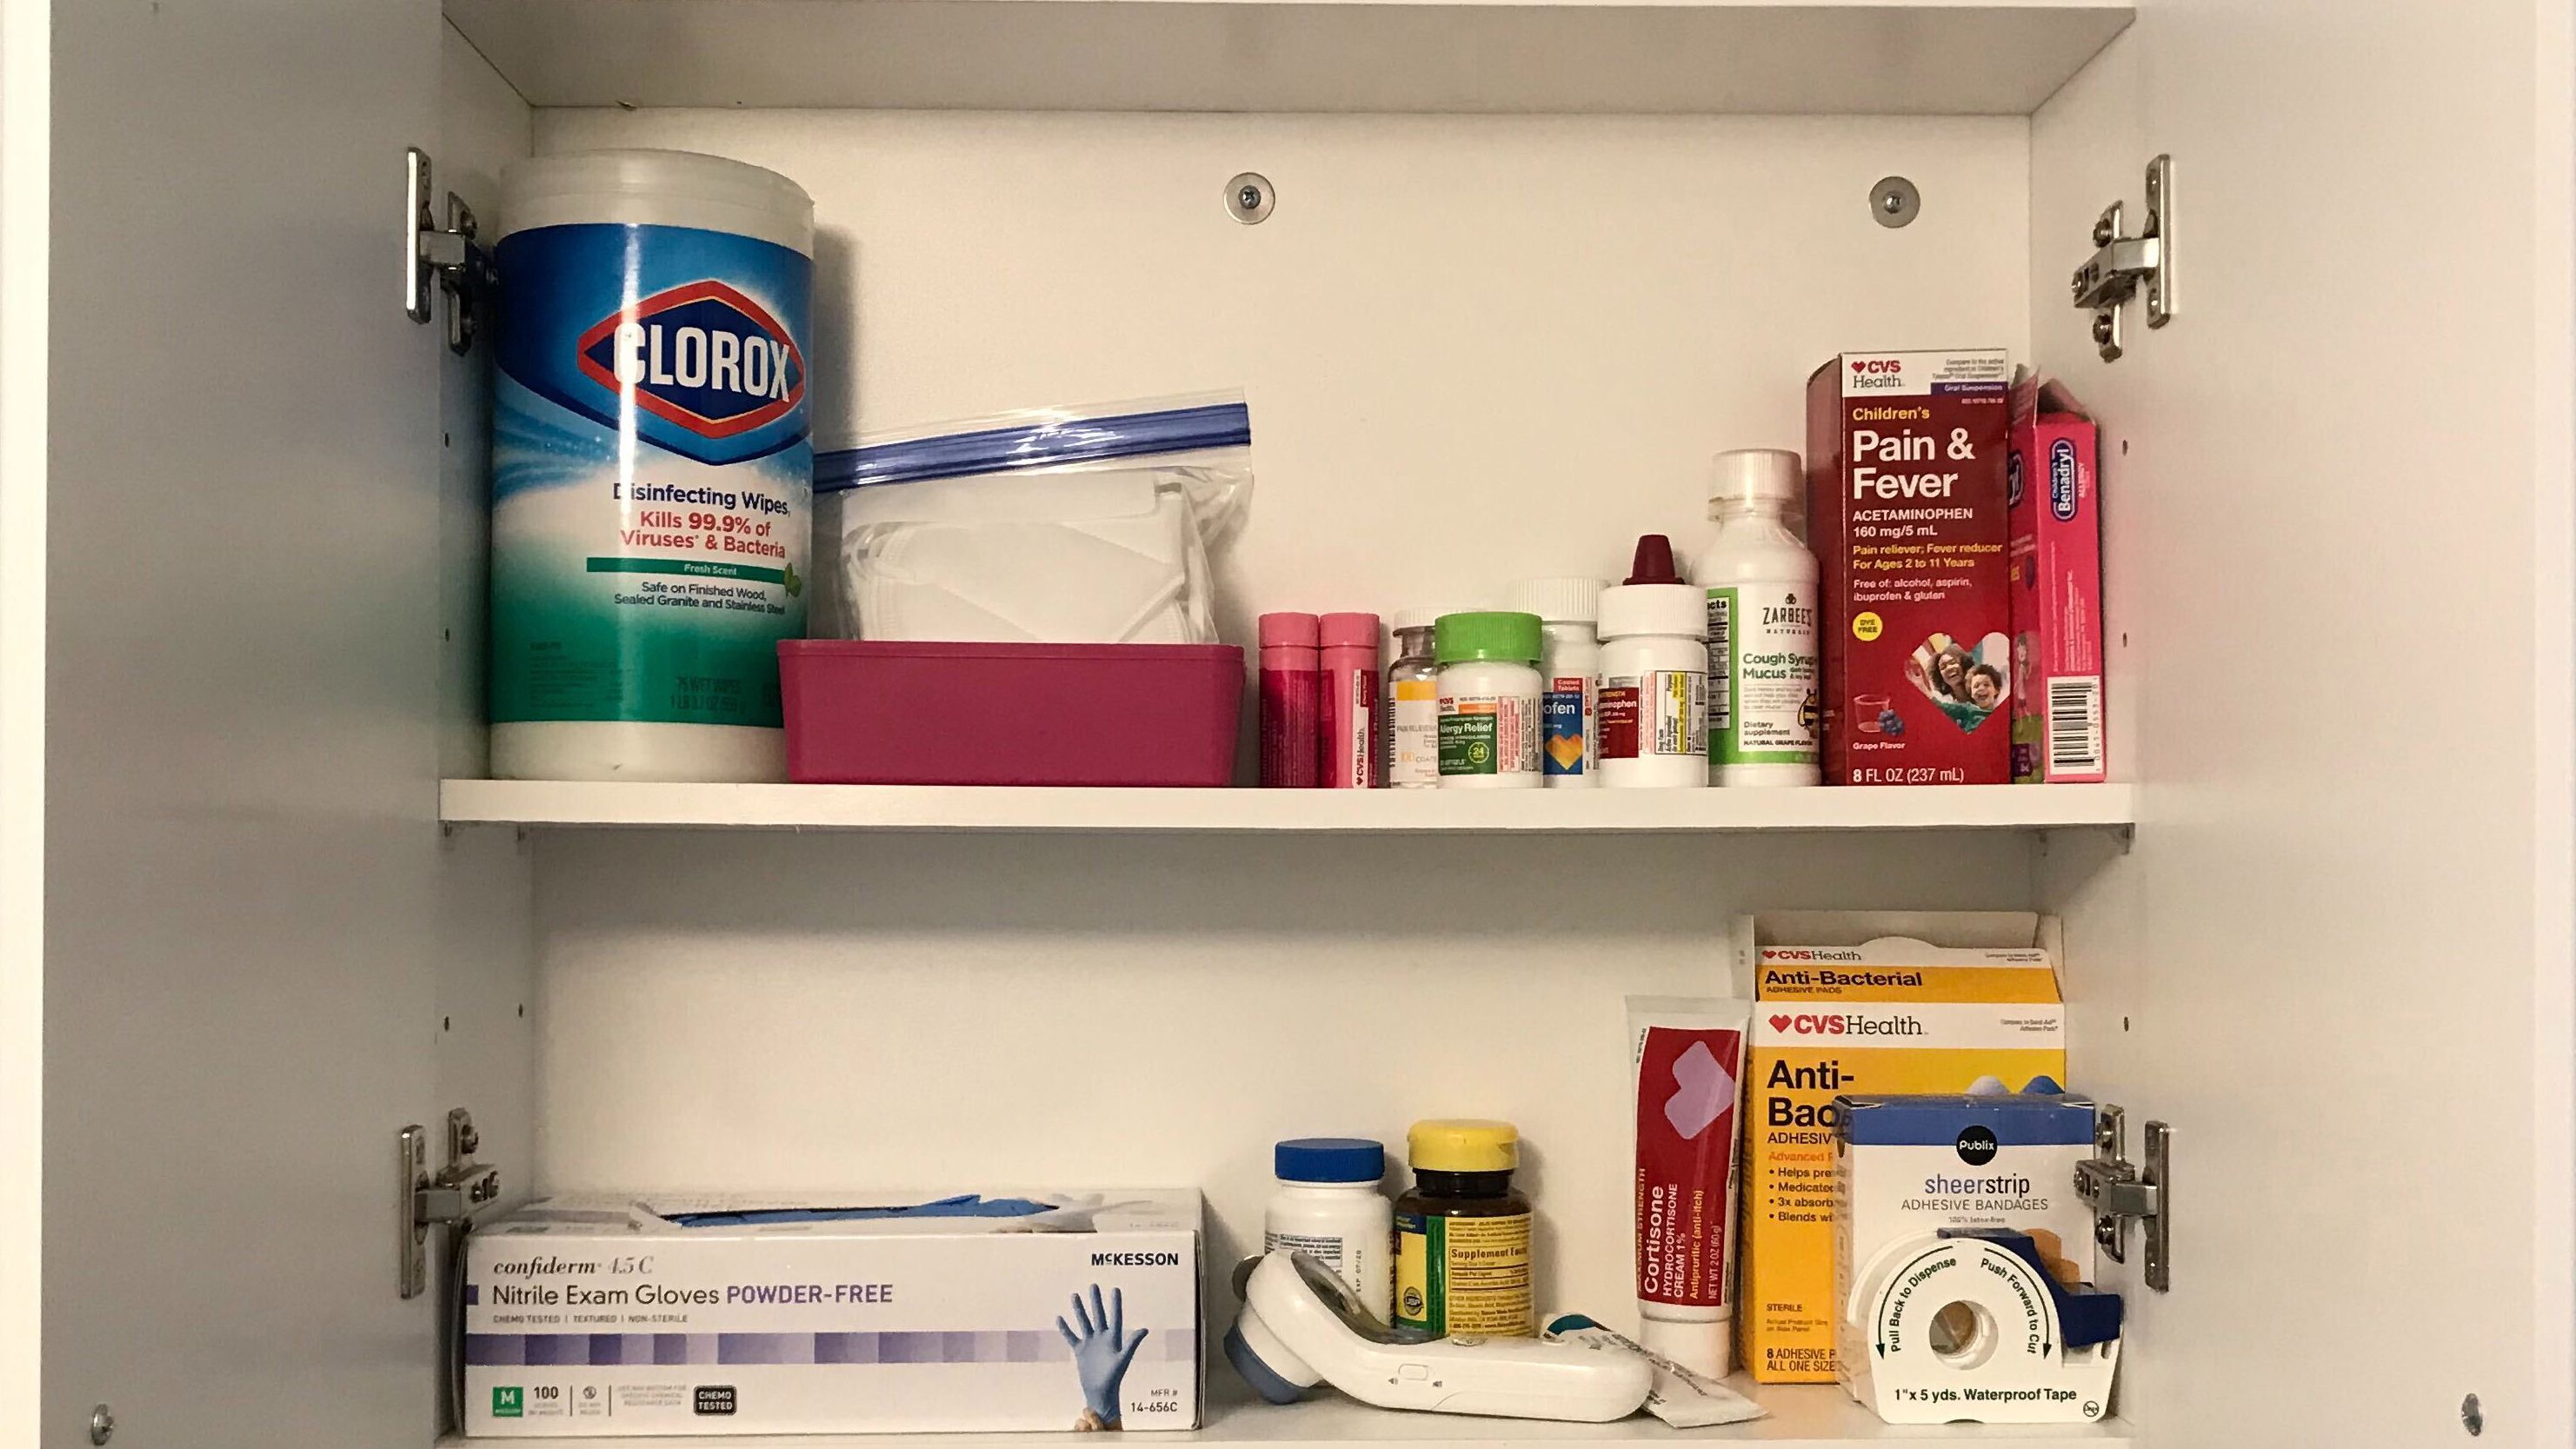 IN DEFENSE OF A WELL-ORGANIZED MEDICINE CABINET